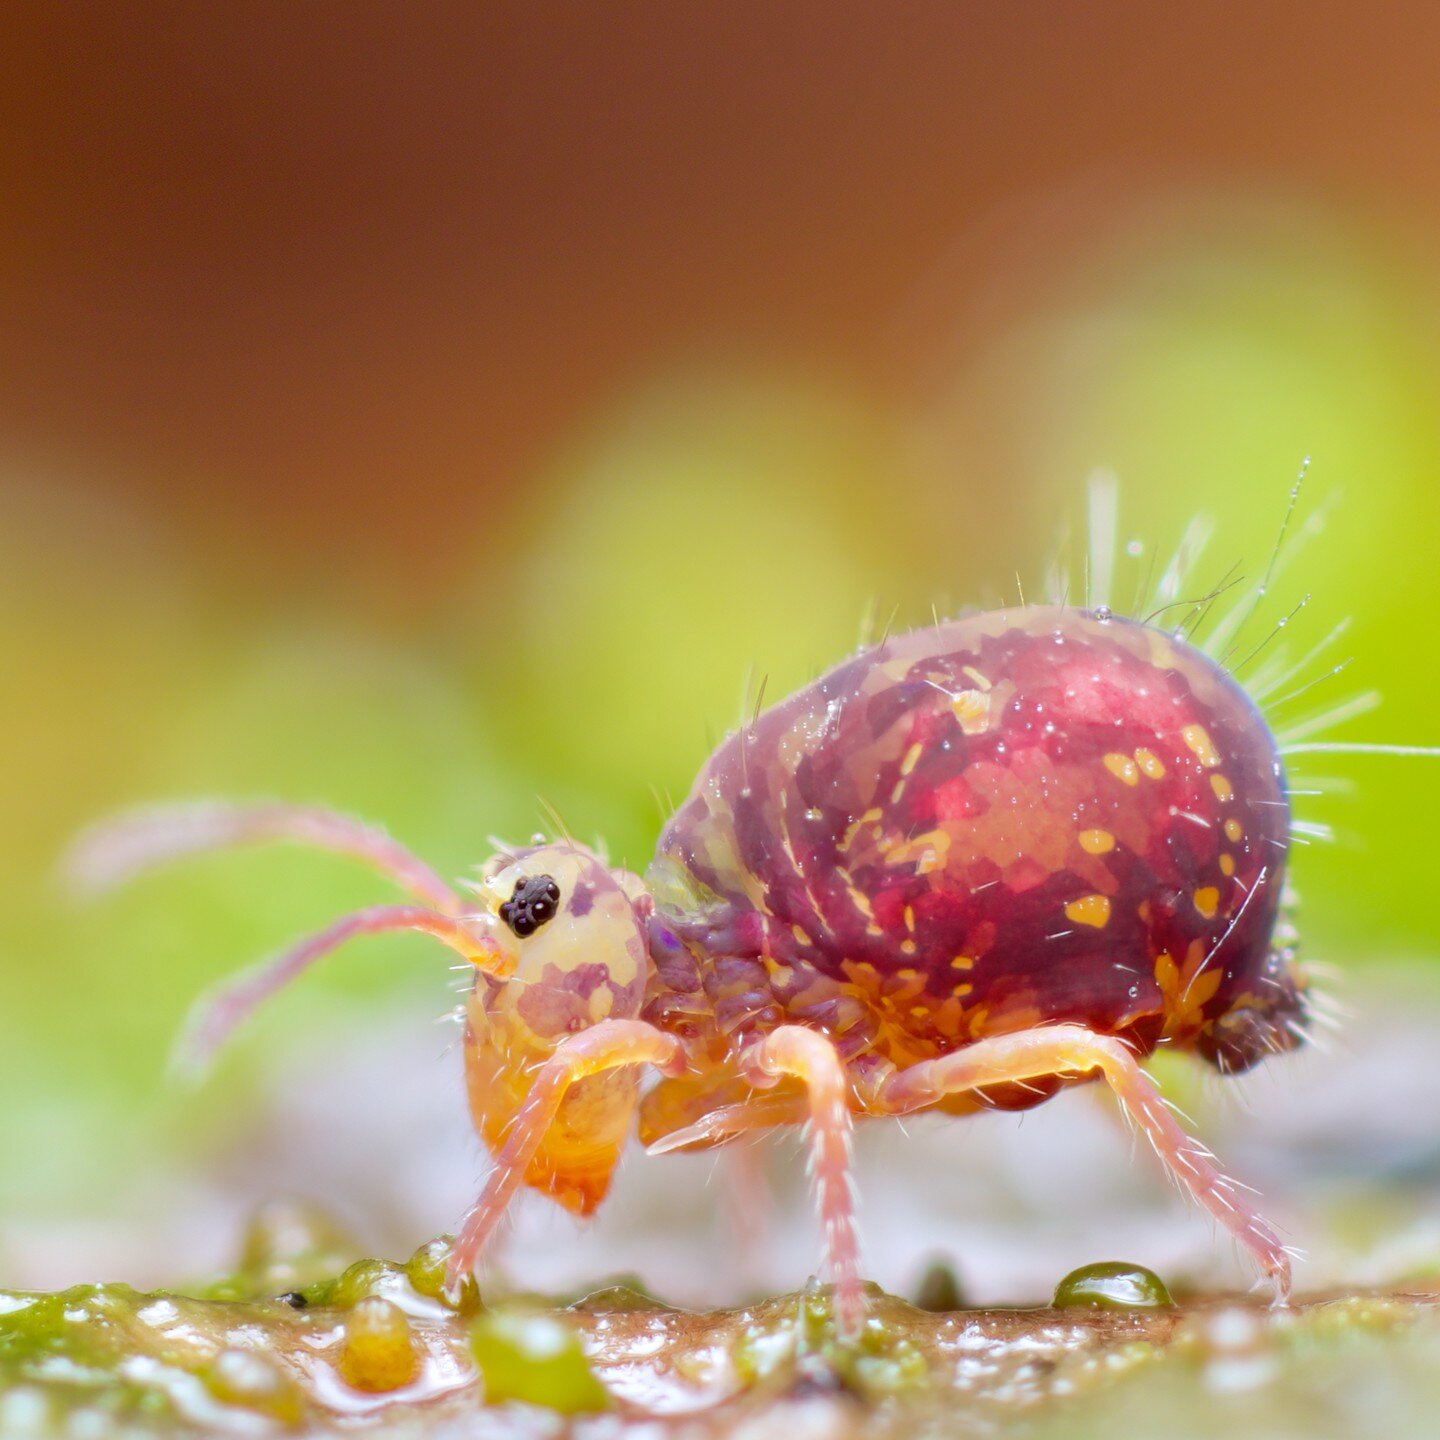 I am a little obsessed with Dicyrtomina ornata. For a 1mm big, UK springtail, they are ridiculously colourful and, well, ornate. They also don't mind being photographed as much as some of the others do so they make a good subject for a more detailed 